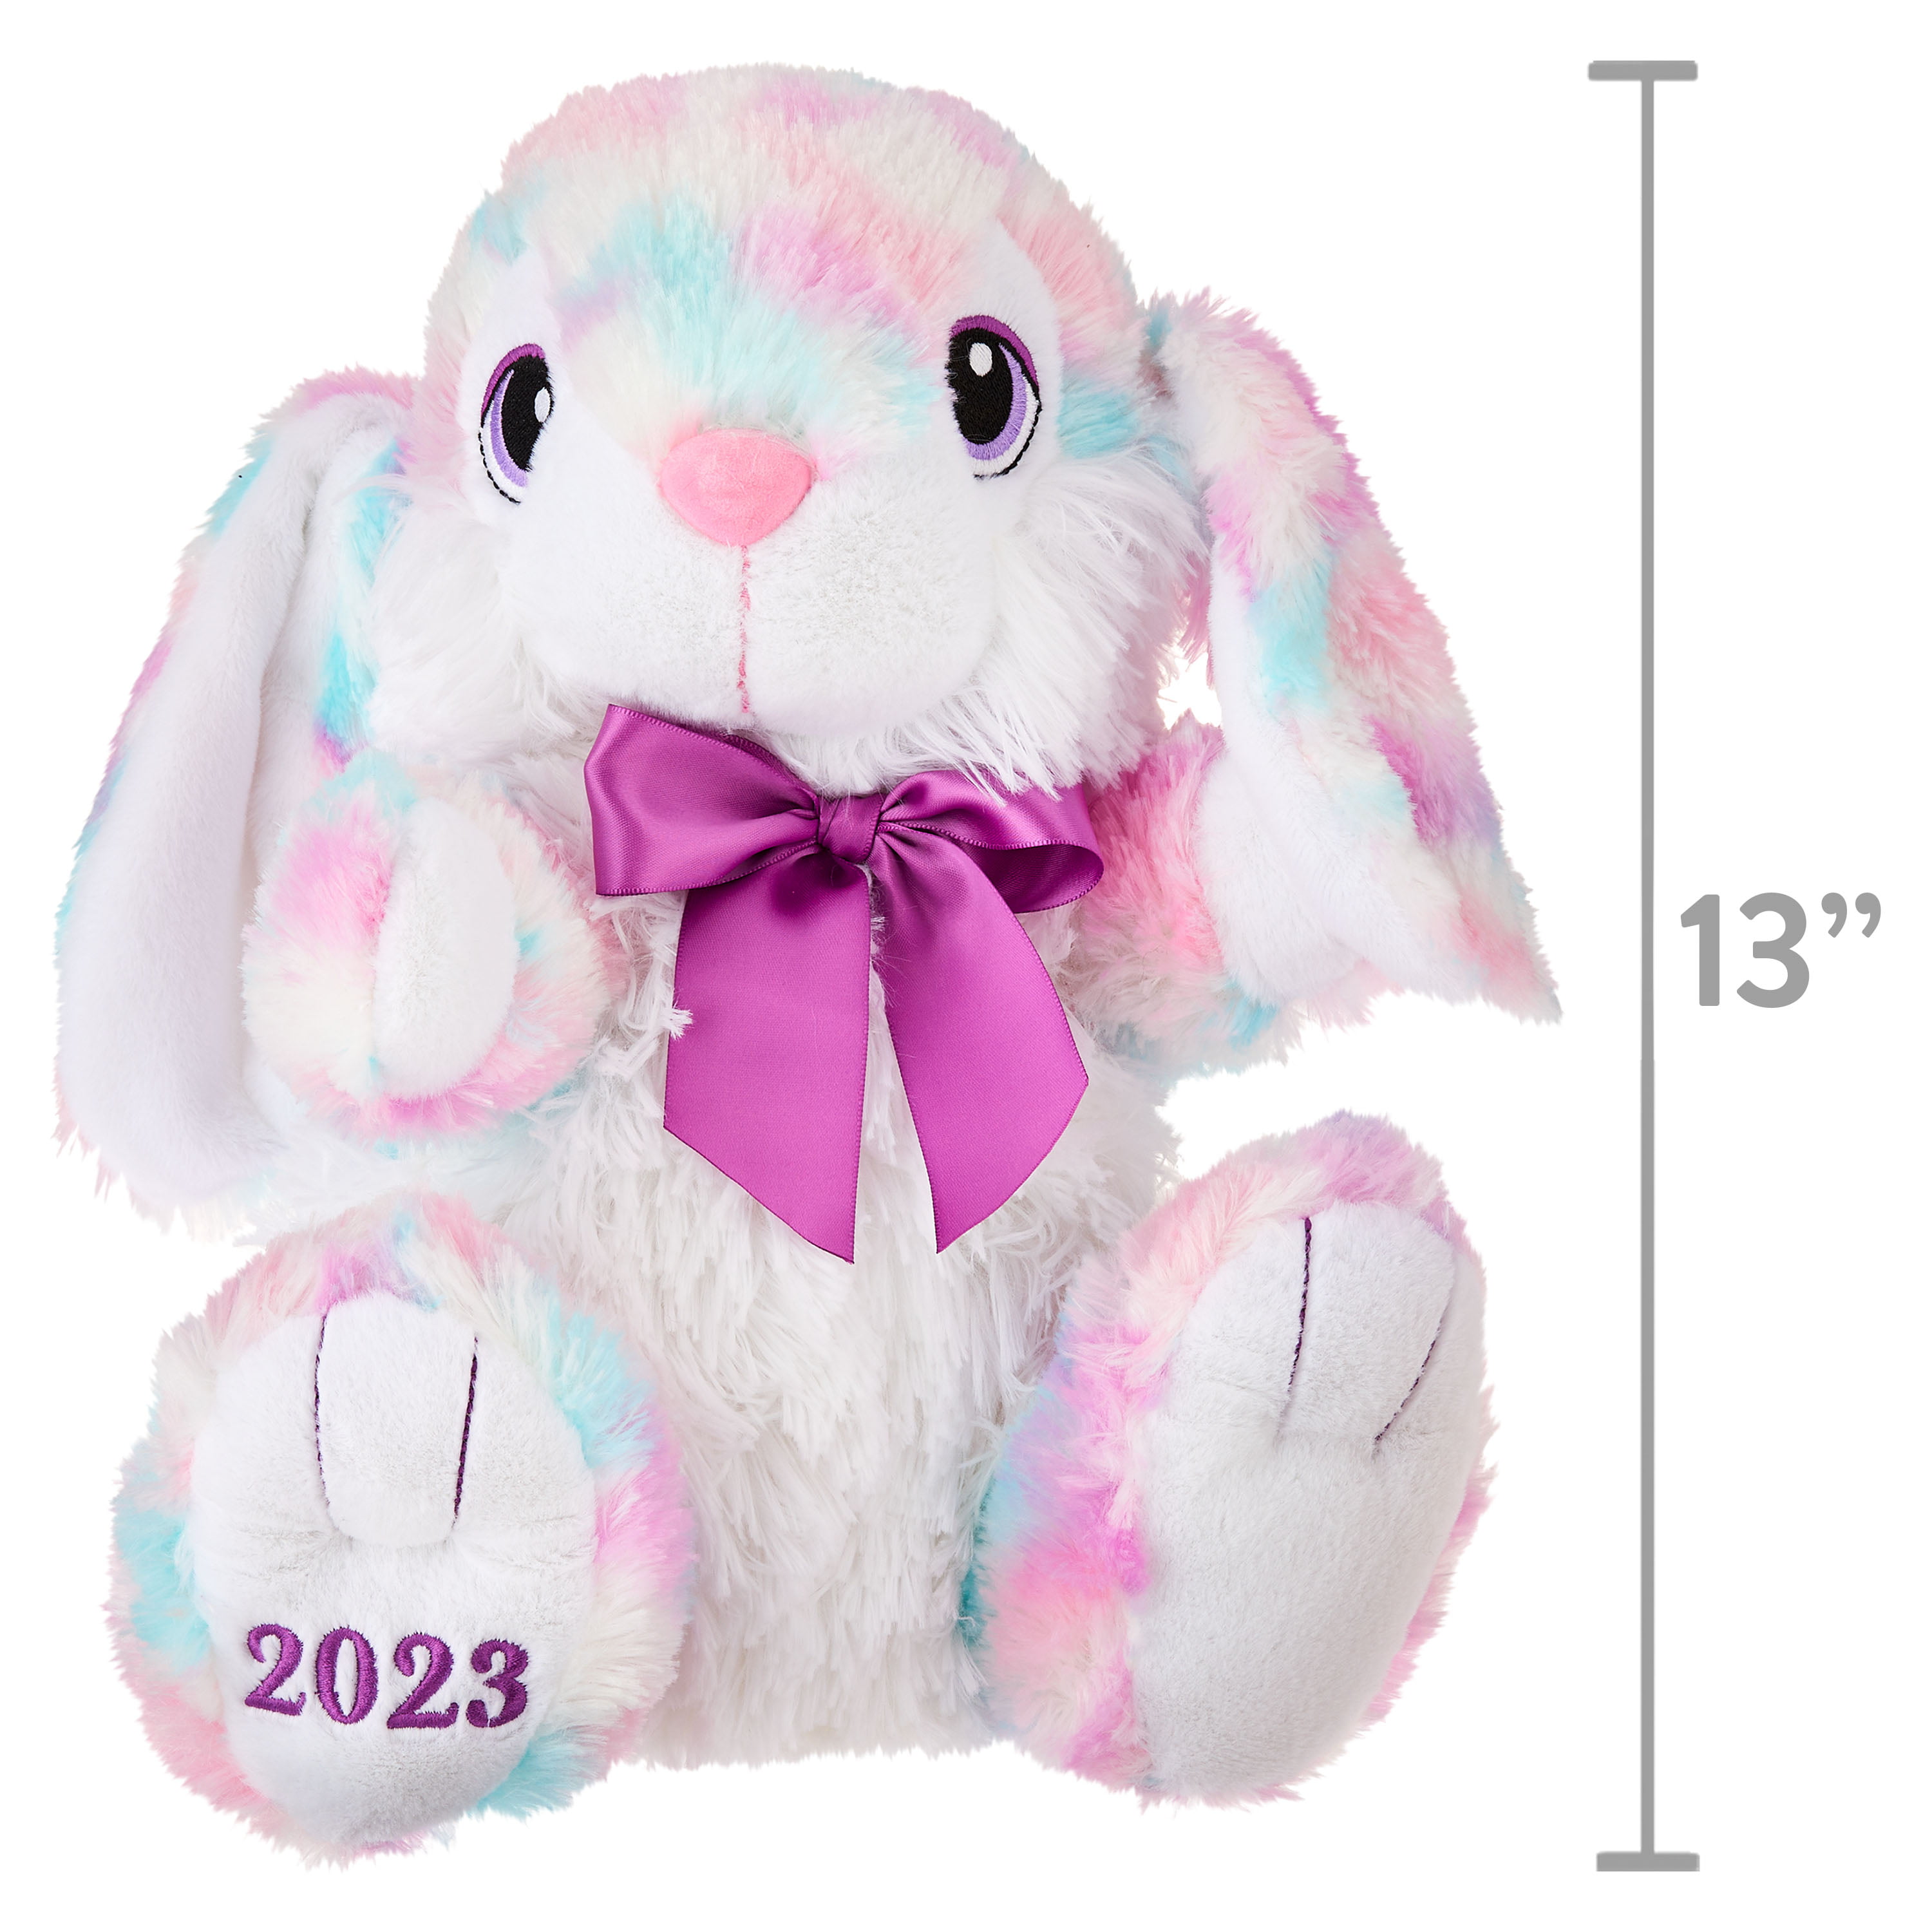 Walmart Easter Hours 2023 — Will Walmart Be Open Easter Sunday?